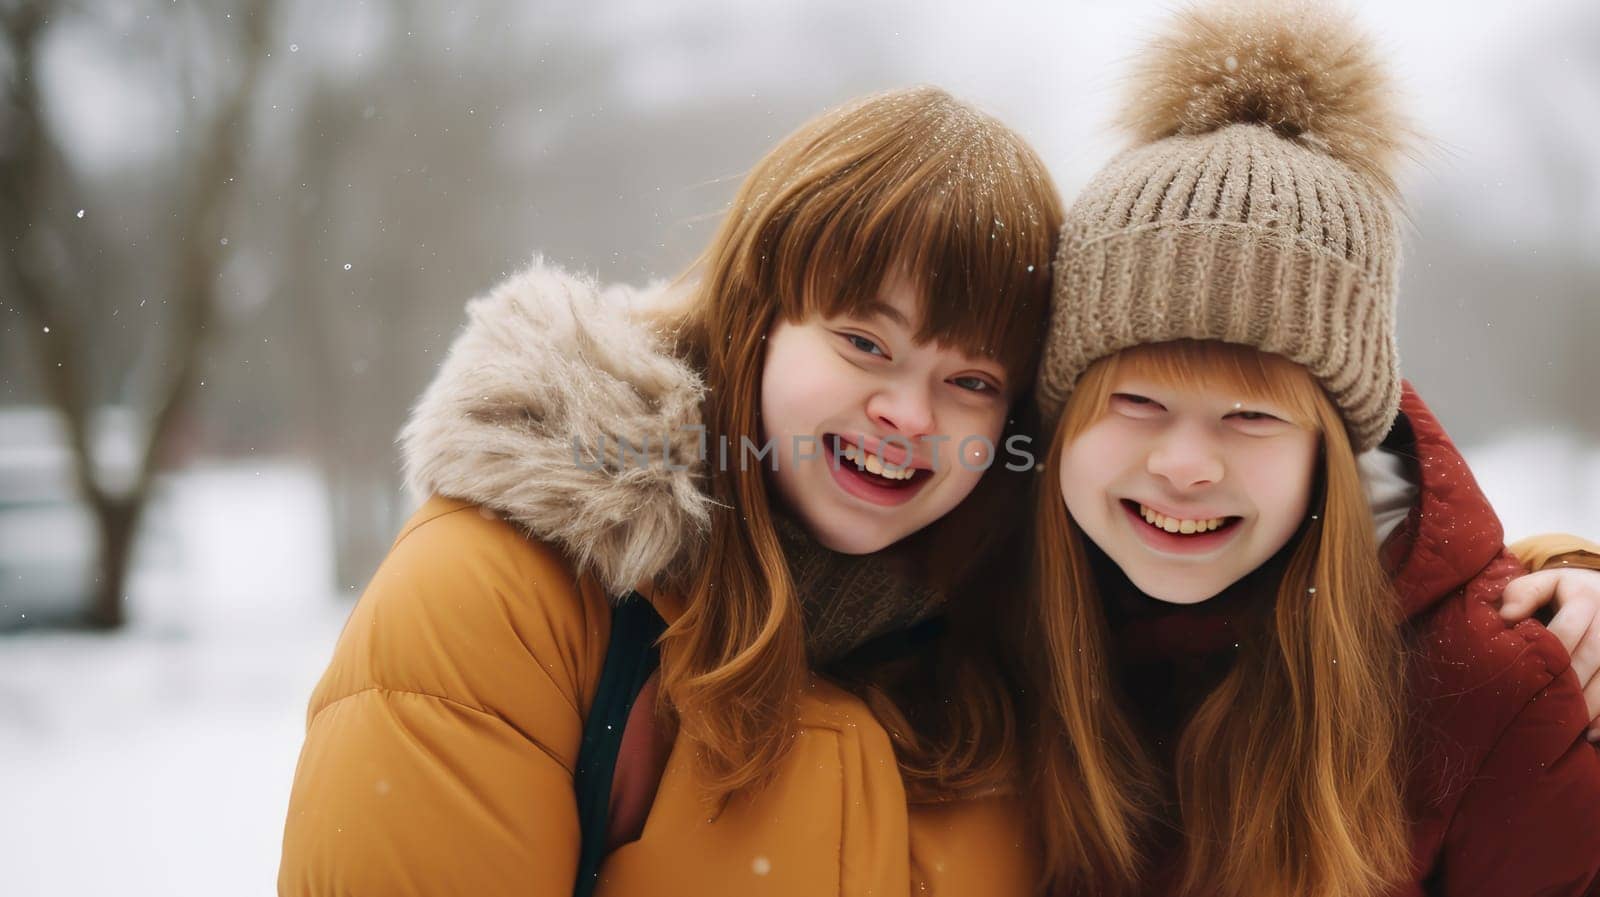 Portrait of Young, beautiful, smiling and happy girls friends with Down syndrome in jackets against the backdrop of a winter, snowy landscape. Concept of traveling around the world, recreation, vacations, tourism in unusual places.